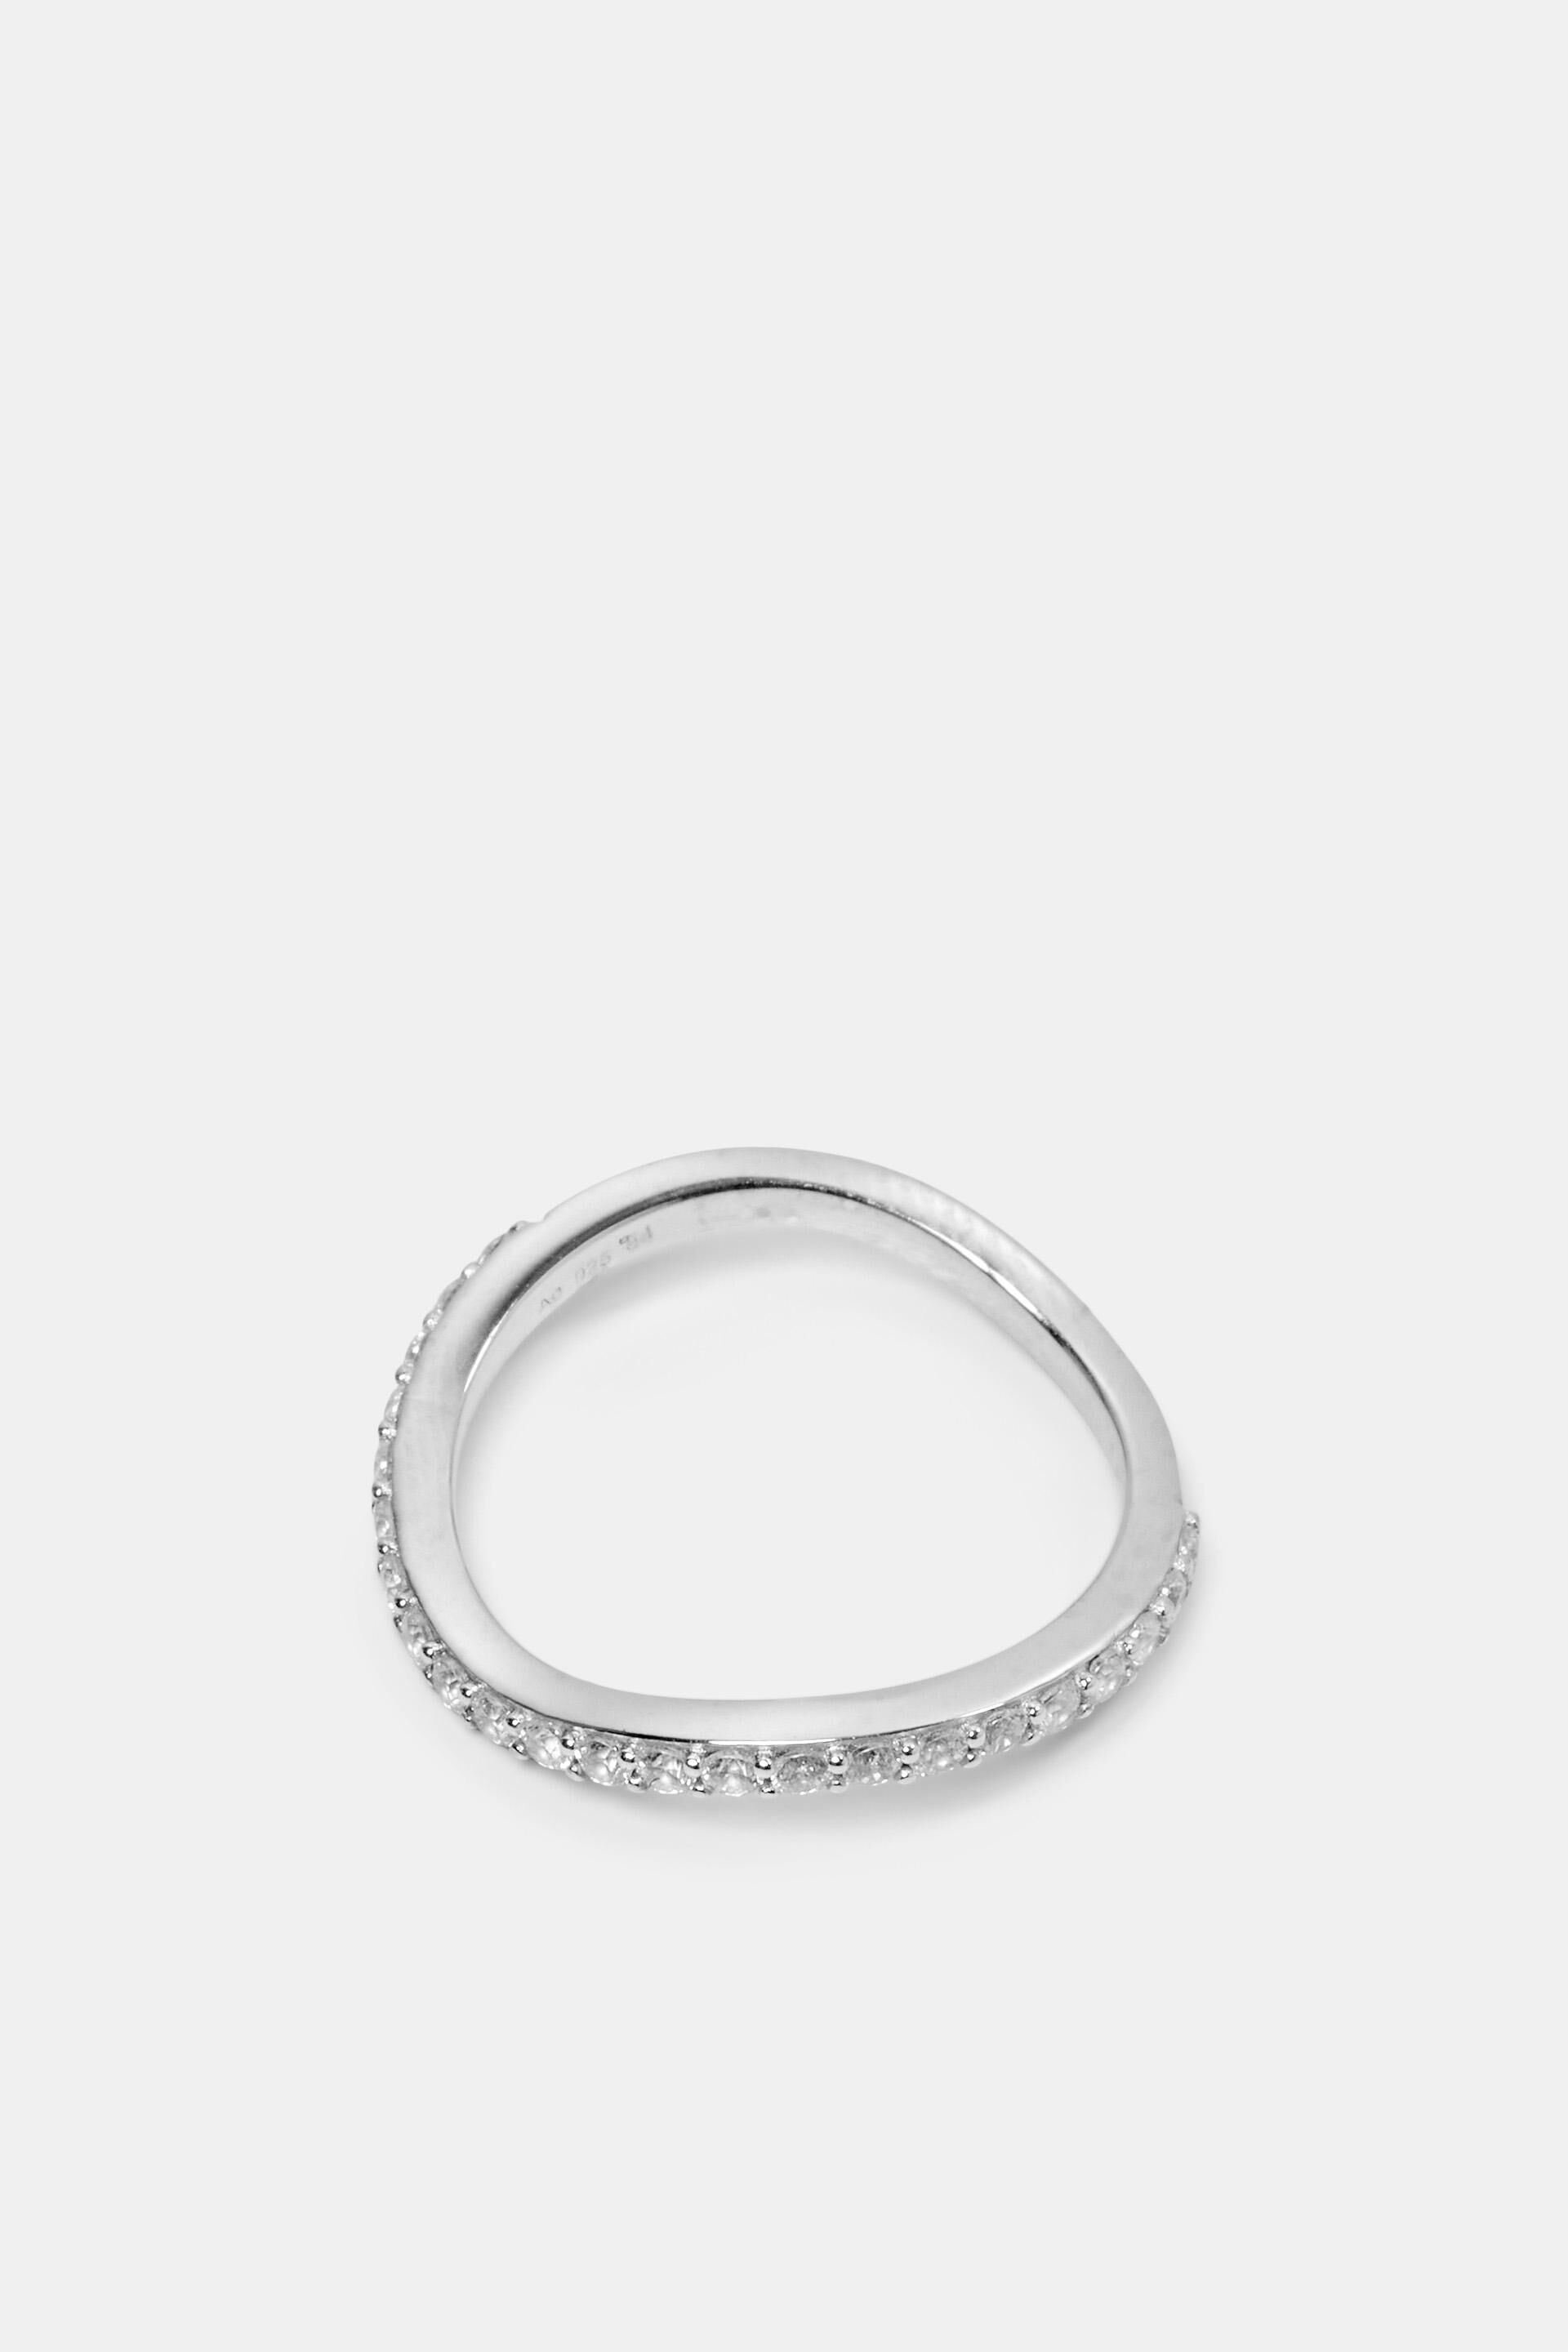 Esprit Wavy Silver Ring Sterling